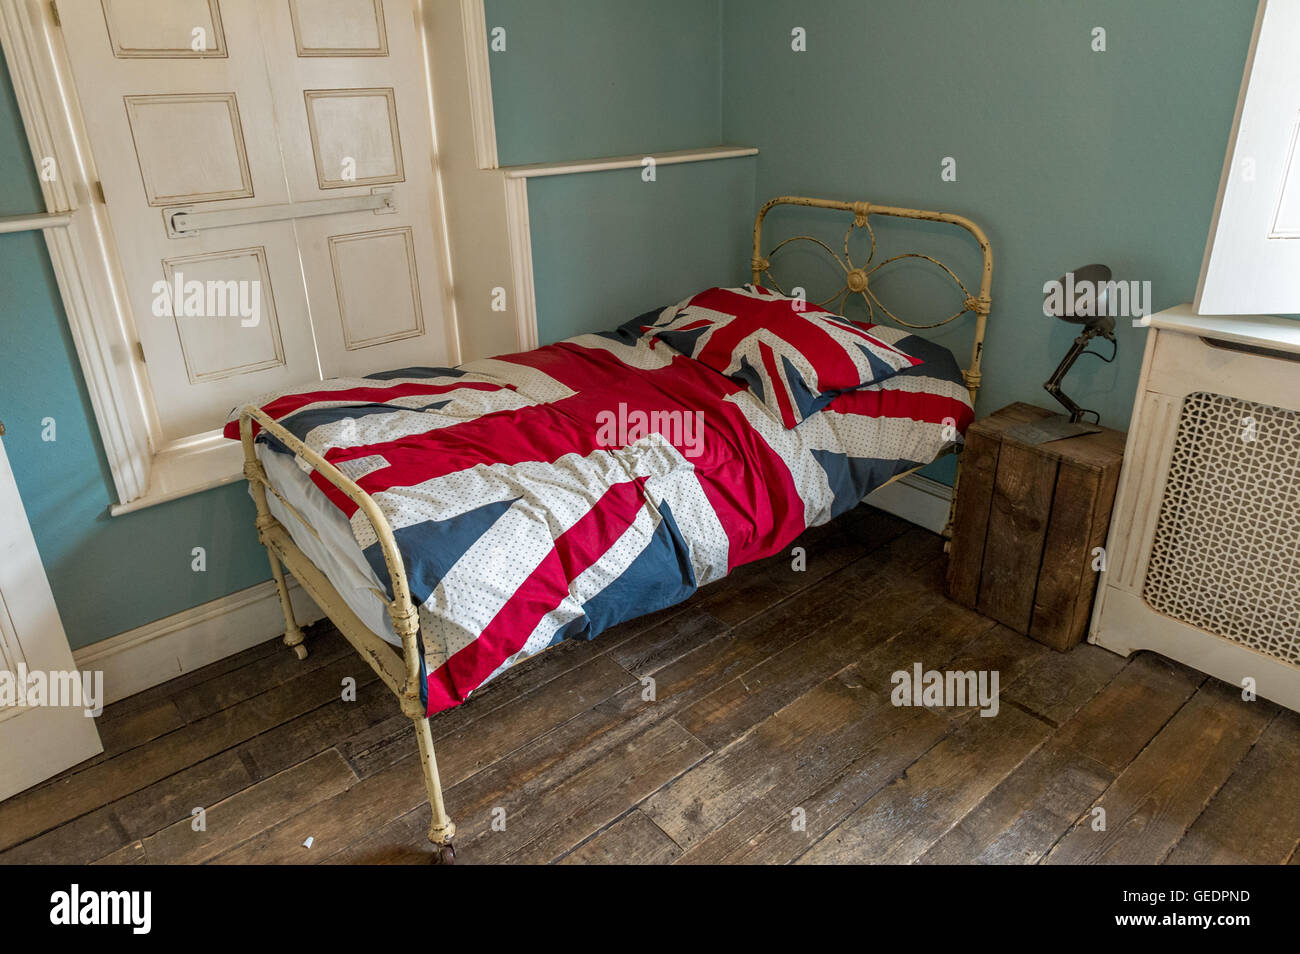 Union Jack Quilt Cover And Pillow Case On A Metal Framed Single